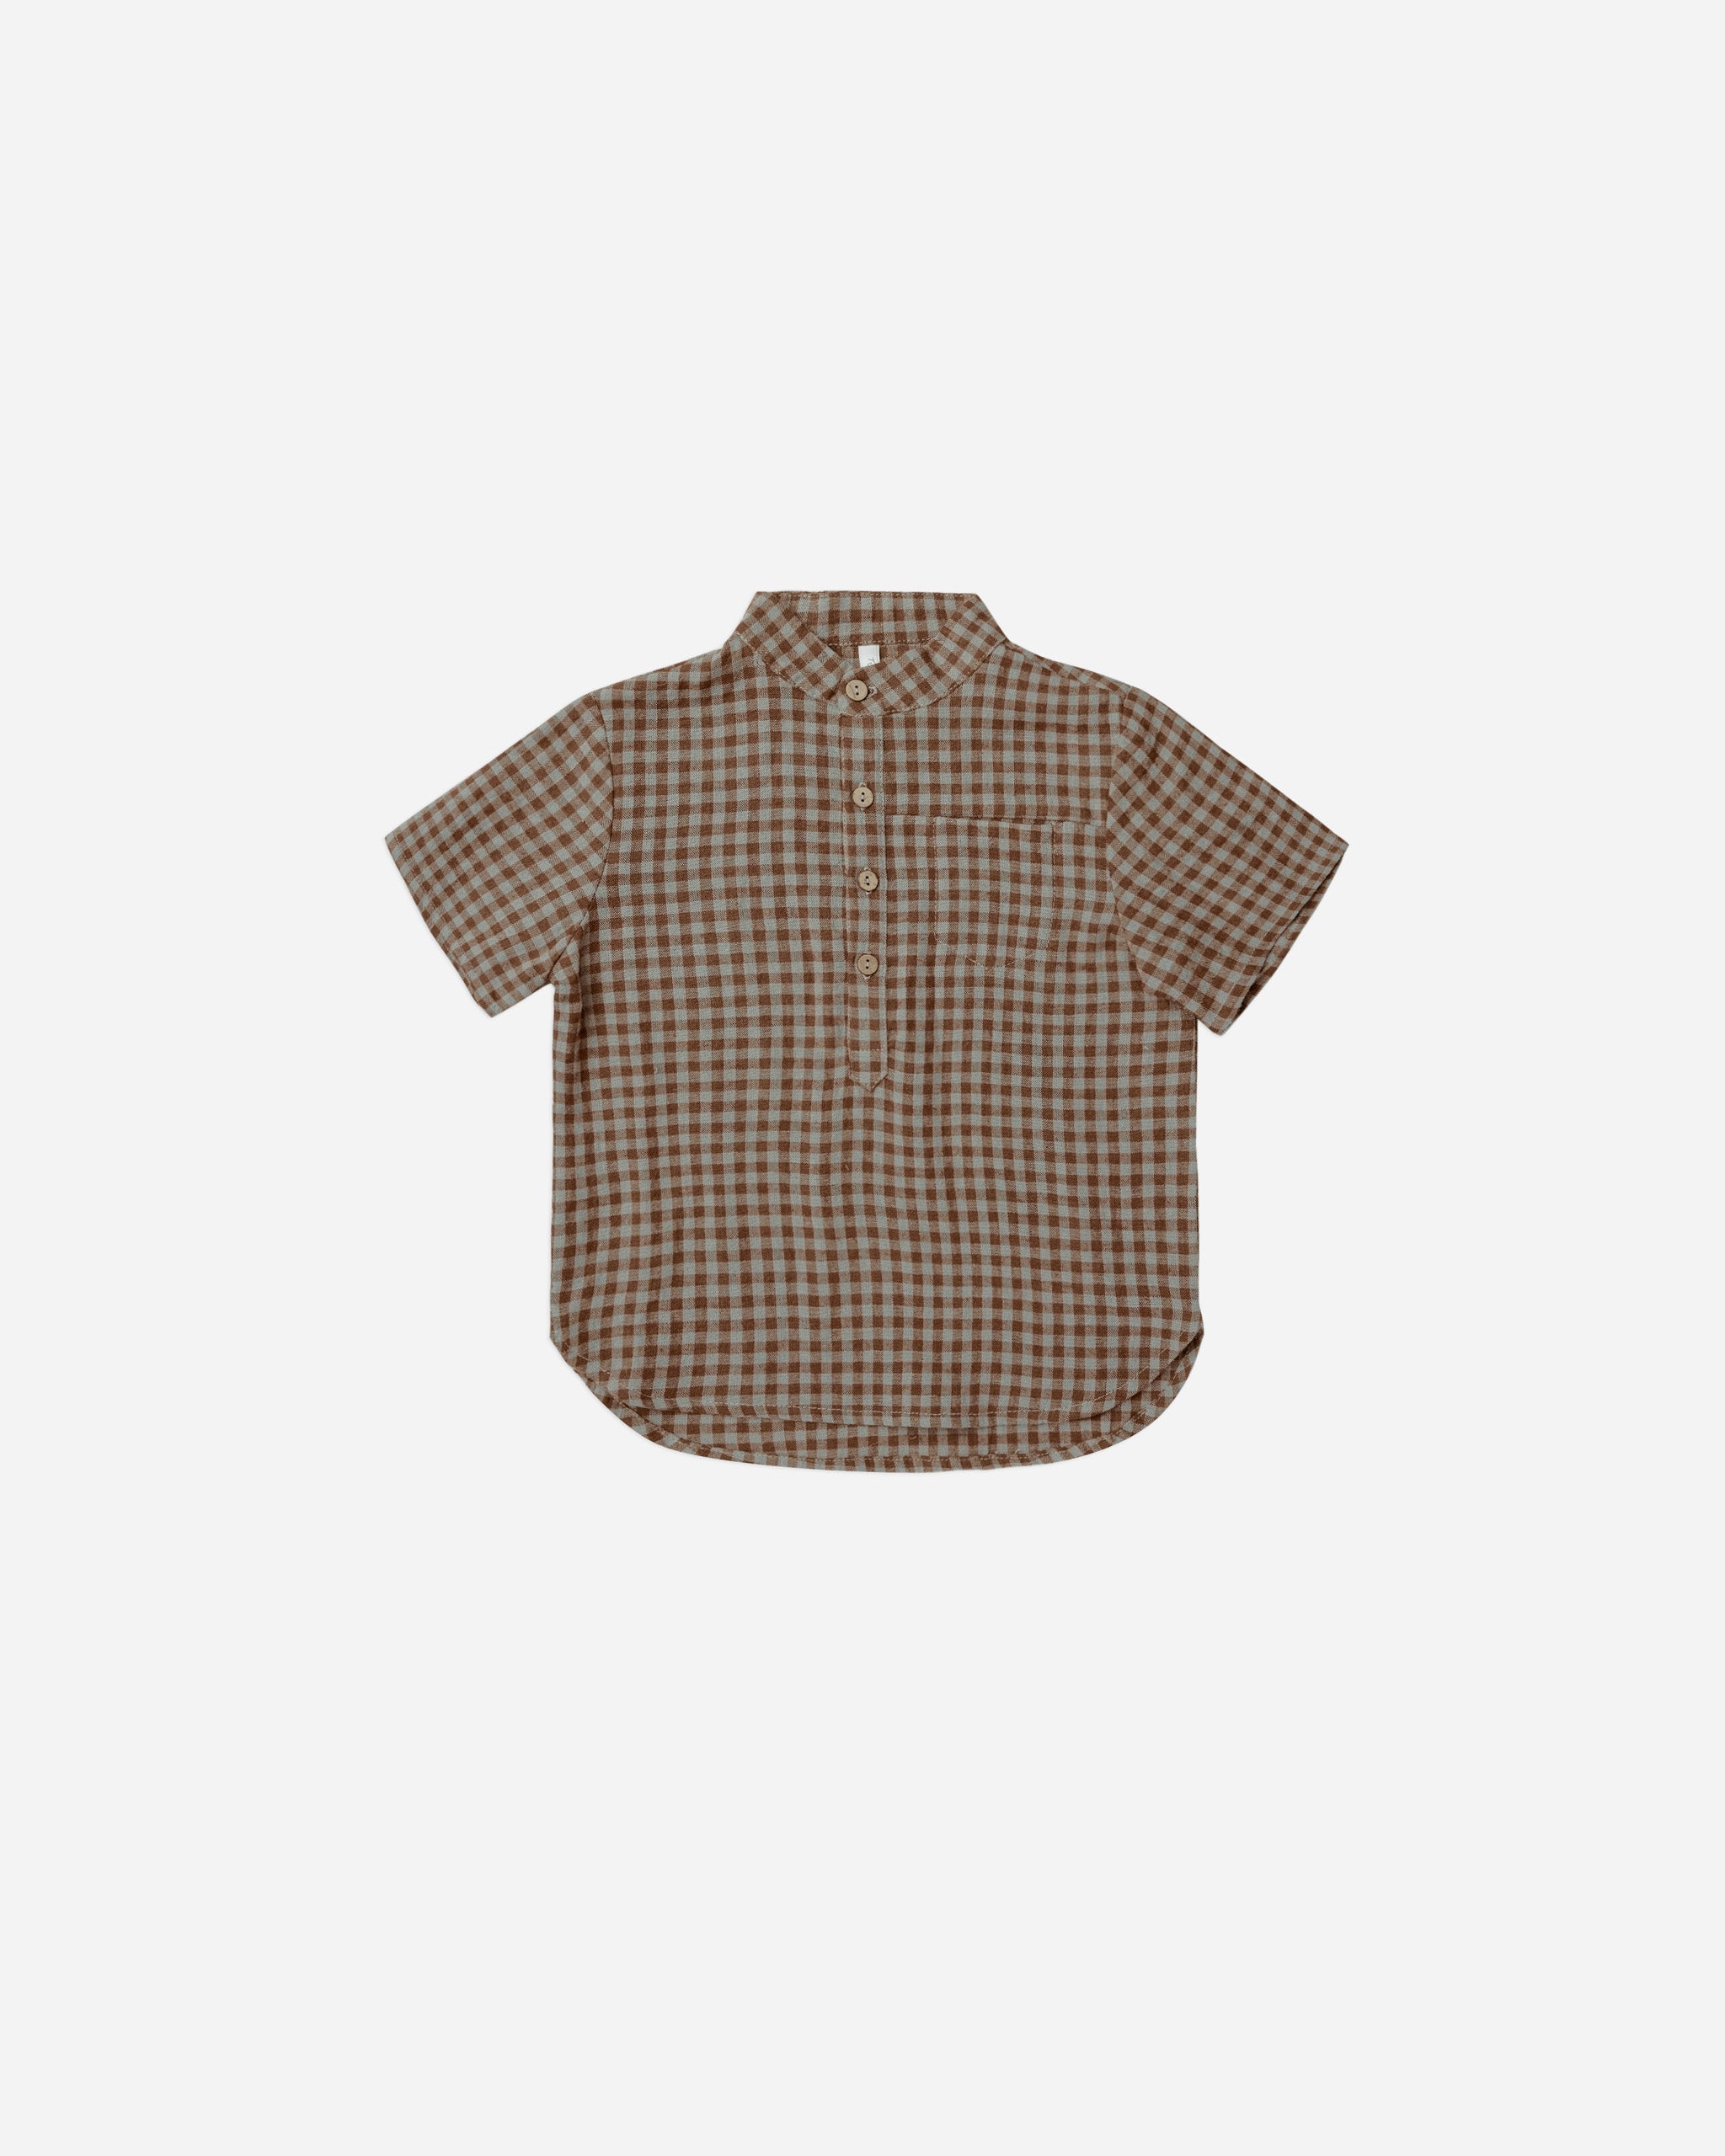 short sleeve mason shirt || gingham - Rylee + Cru | Kids Clothes | Trendy Baby Clothes | Modern Infant Outfits |